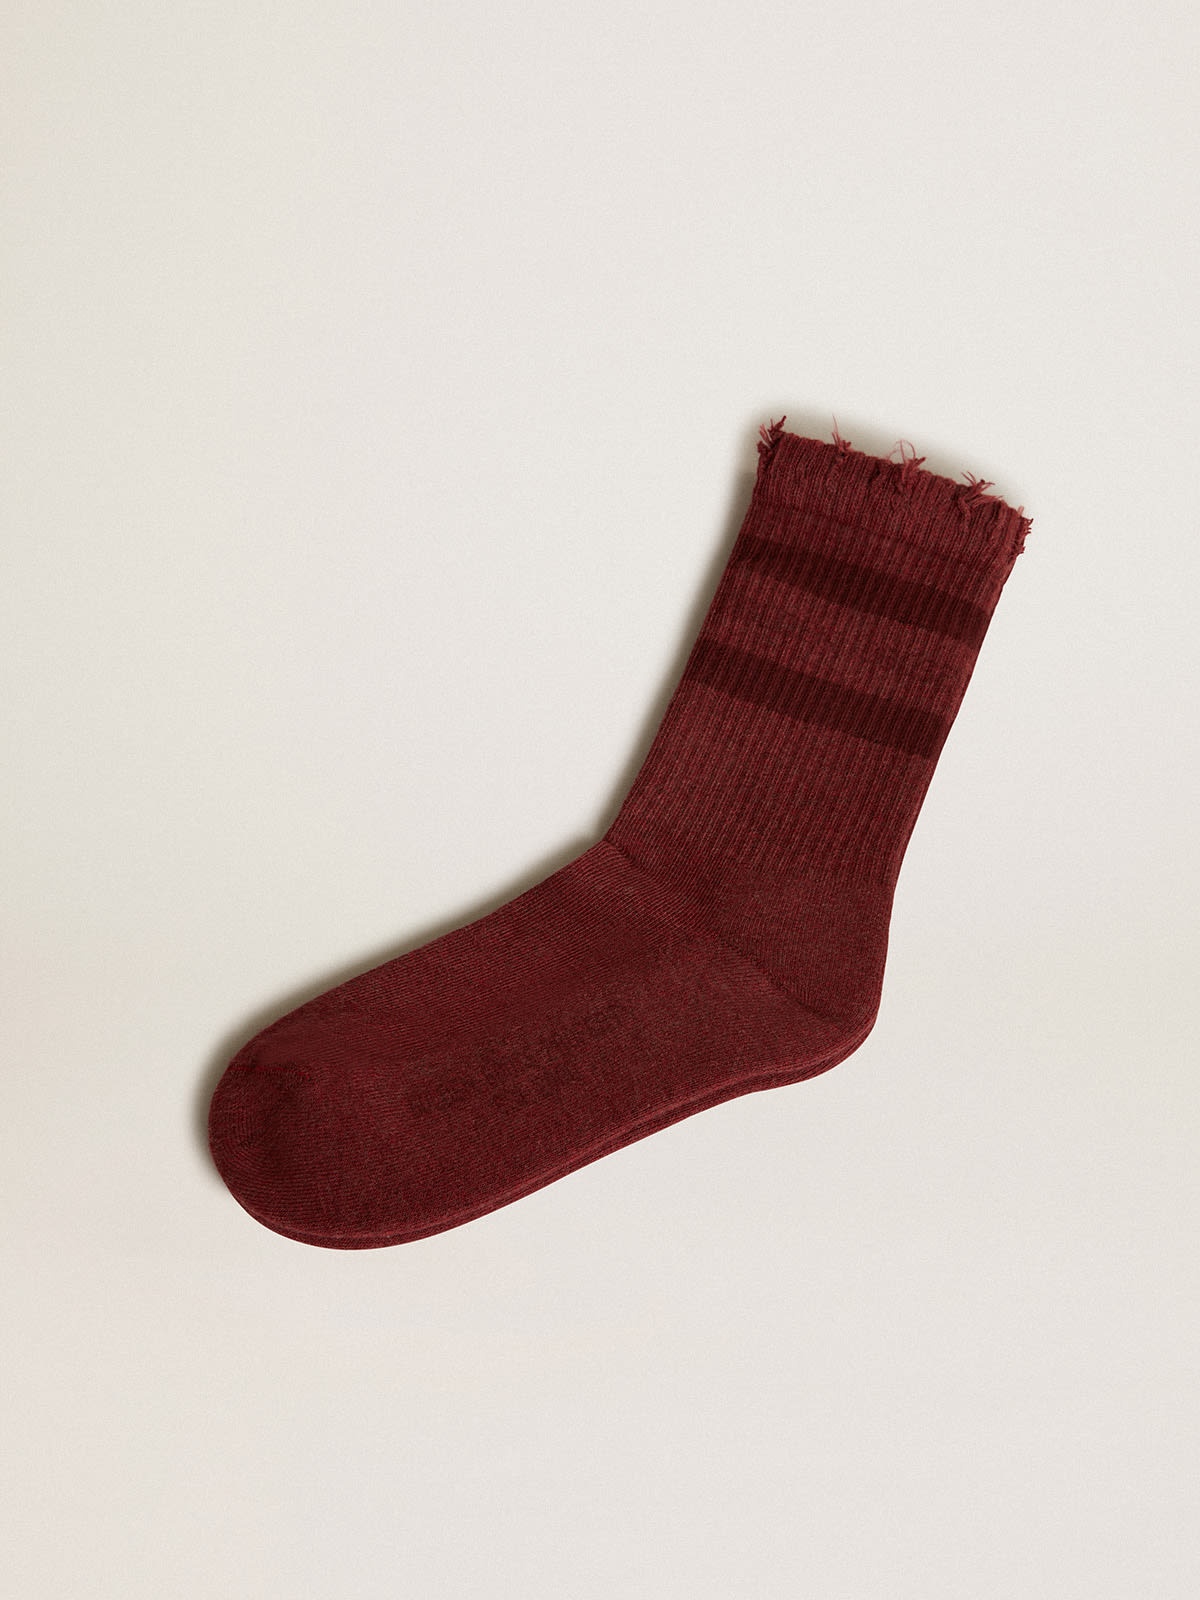 Burgundy socks with distressed details and tone-on-tone stripes - 1